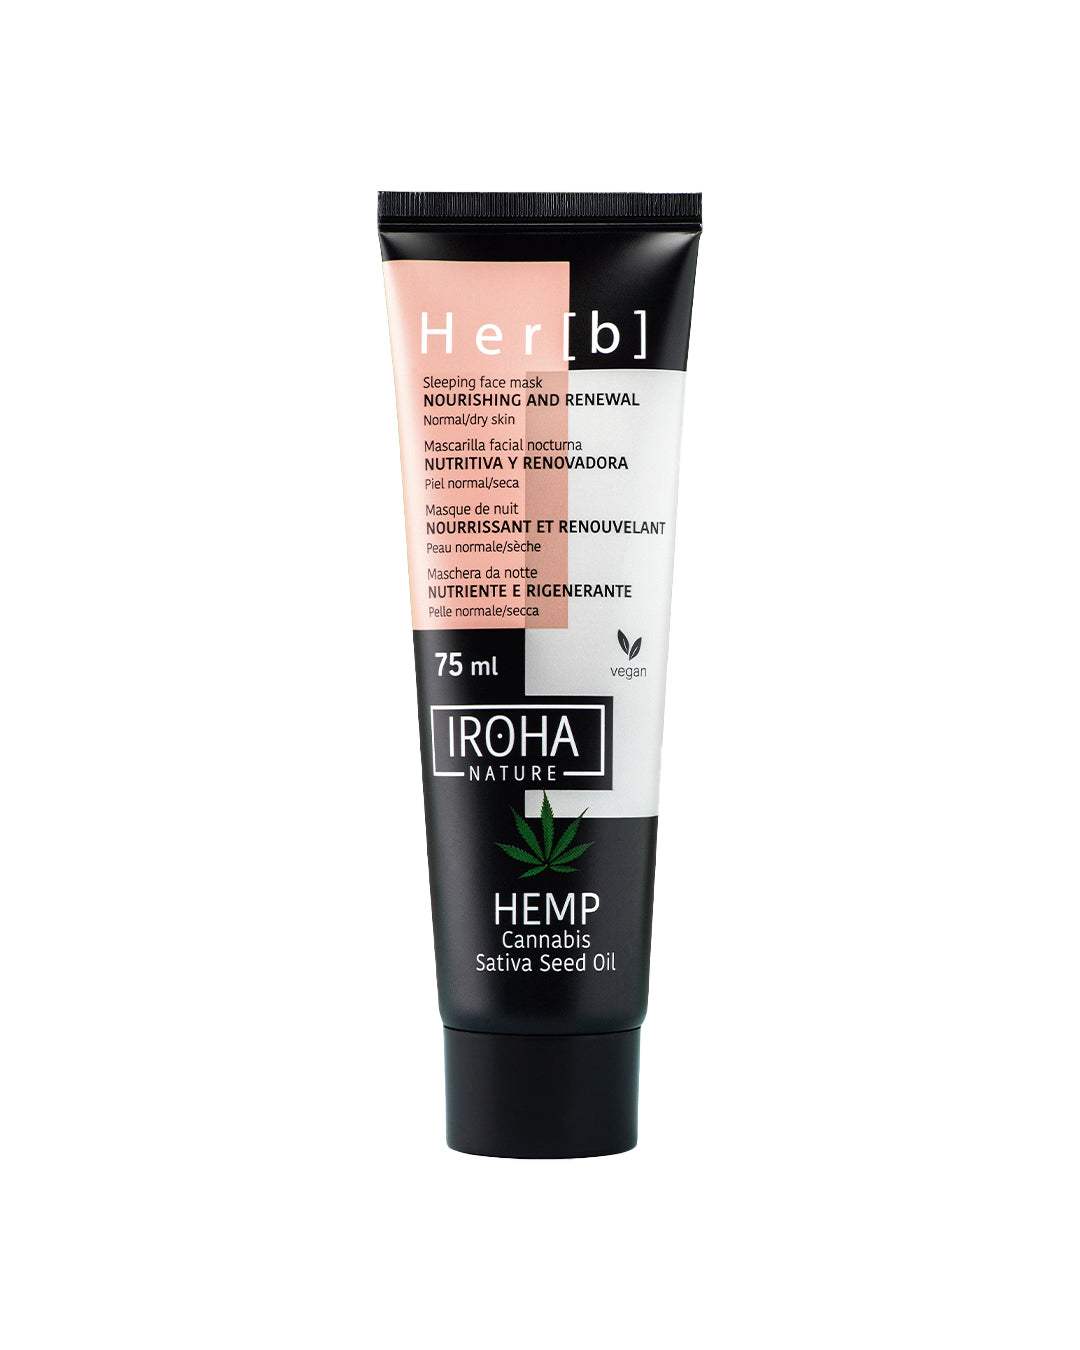 

Iroha Nature Nourishing and Regenerating Night Face Mask with Cannabis Seed Oil + Hyaluronic Acid + Vitamin C 75 ml.